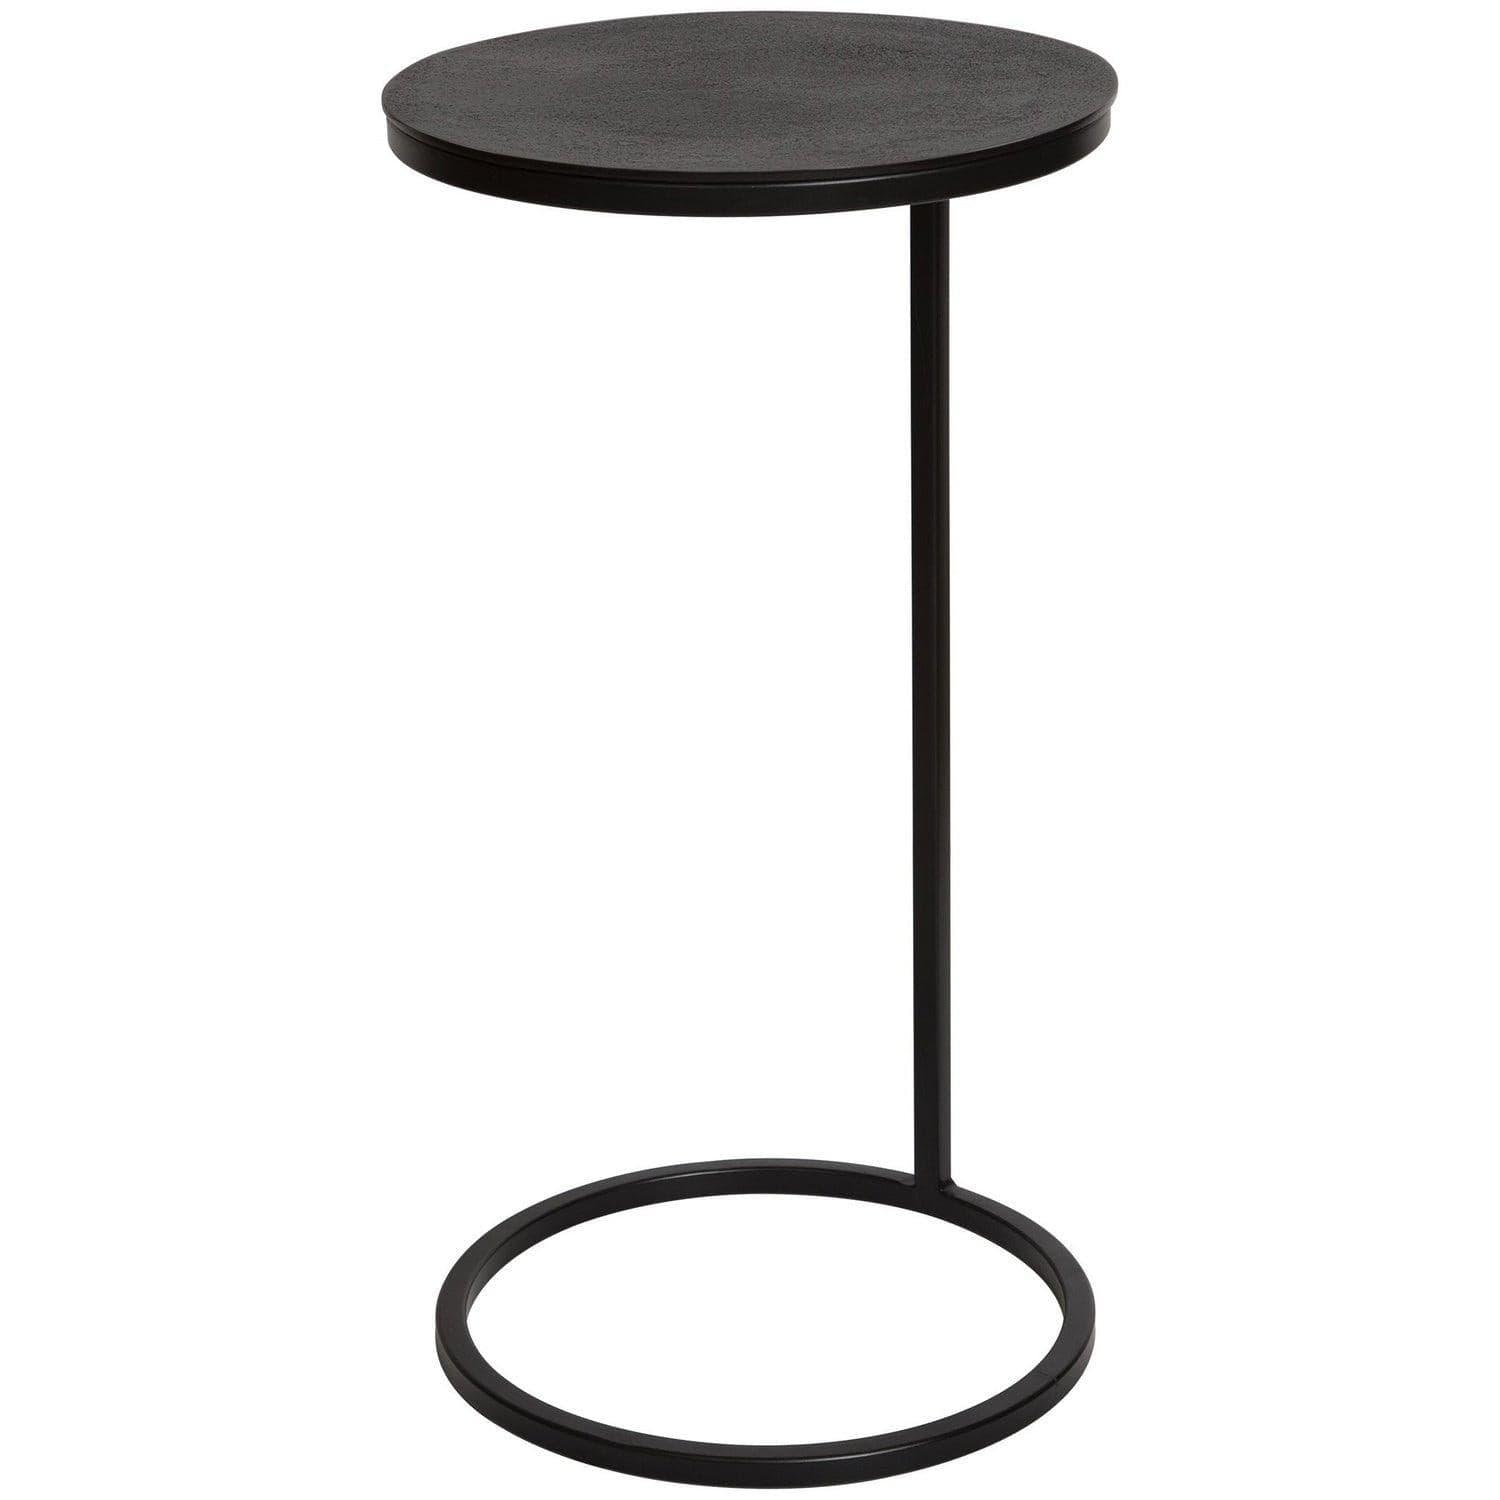 The Uttermost Brunei Accent Table 25137 Montreal Lighting and Hardware